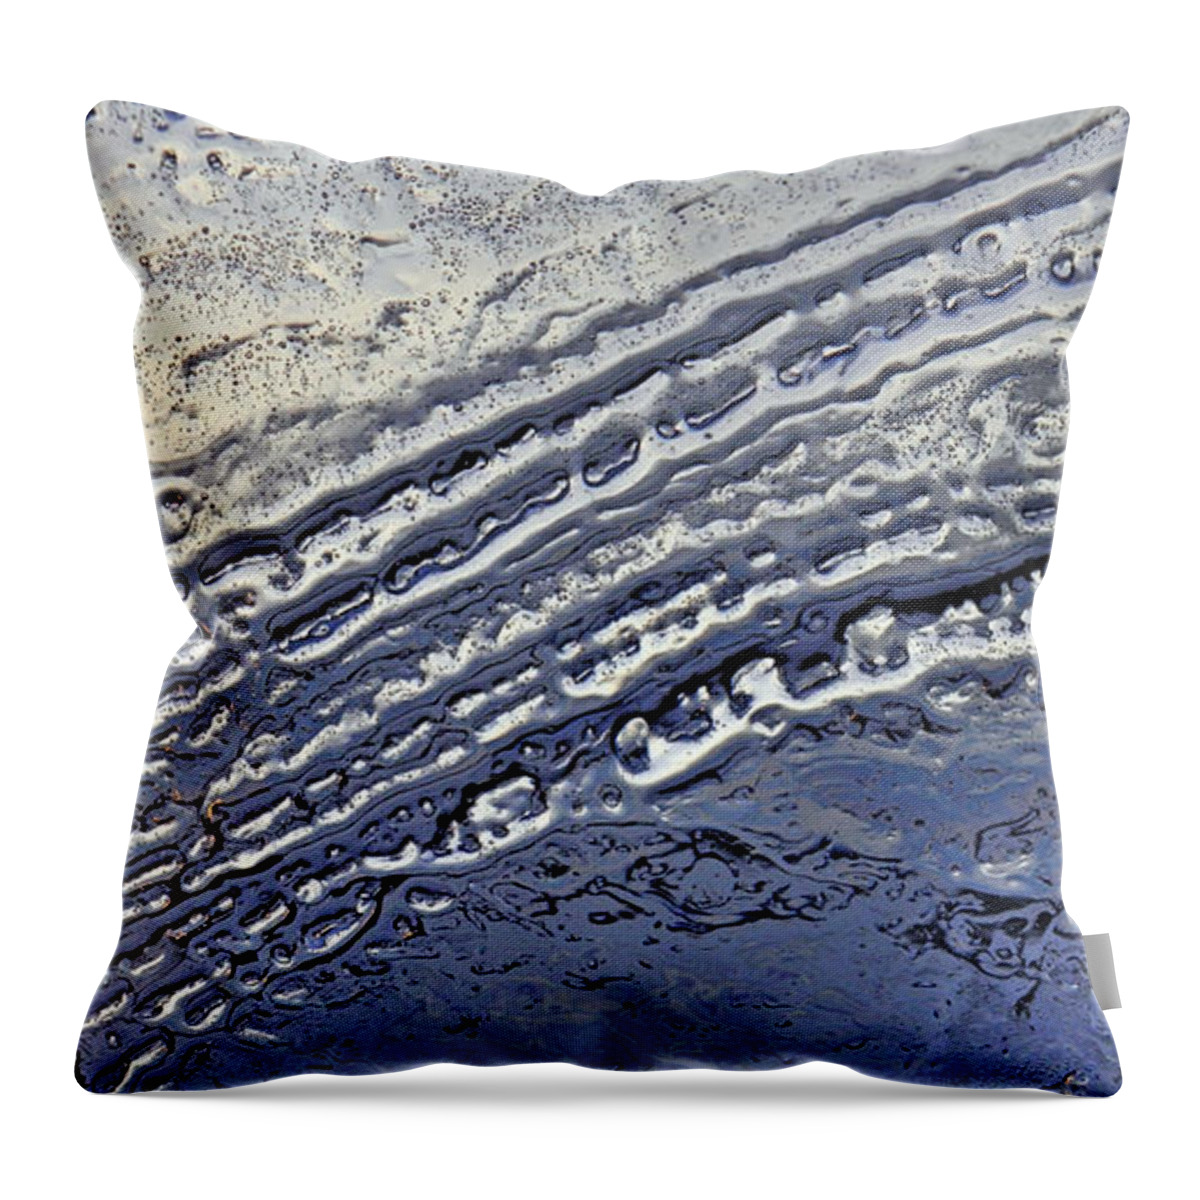 Ice Art Throw Pillow featuring the photograph S-curve by Sami Tiainen